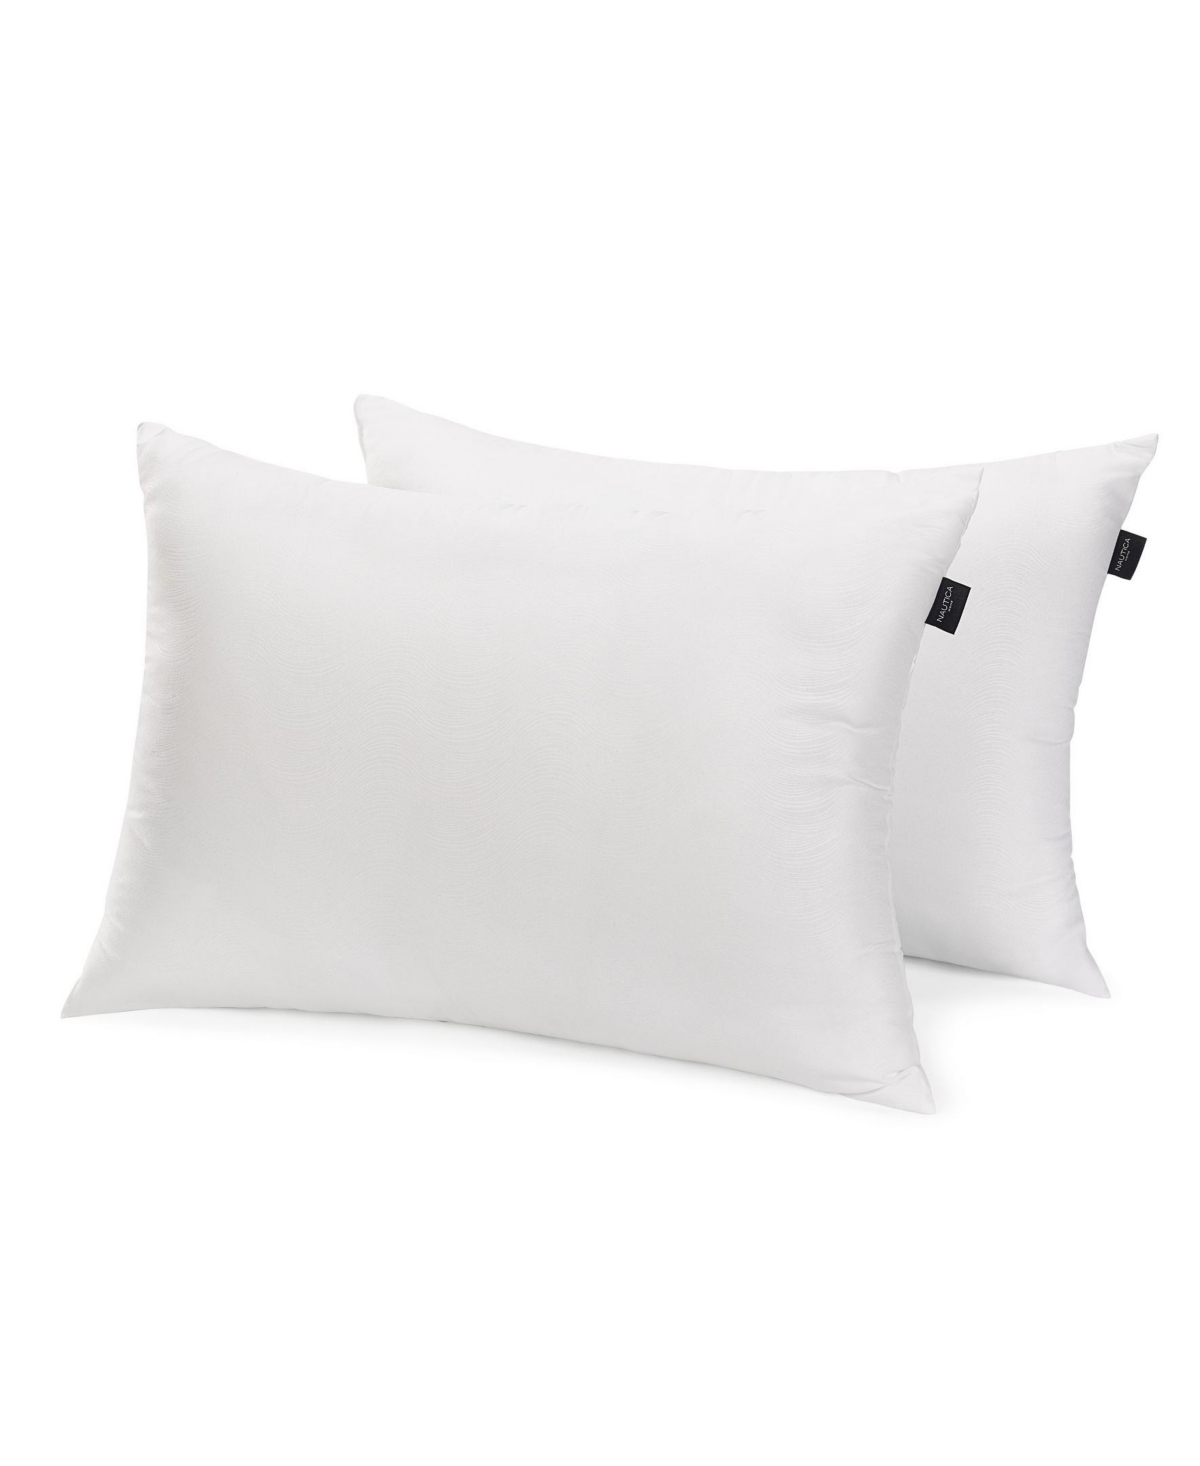 Nautica Home Embossed Ocean Waves 2 Pack Pillows, Standard In White